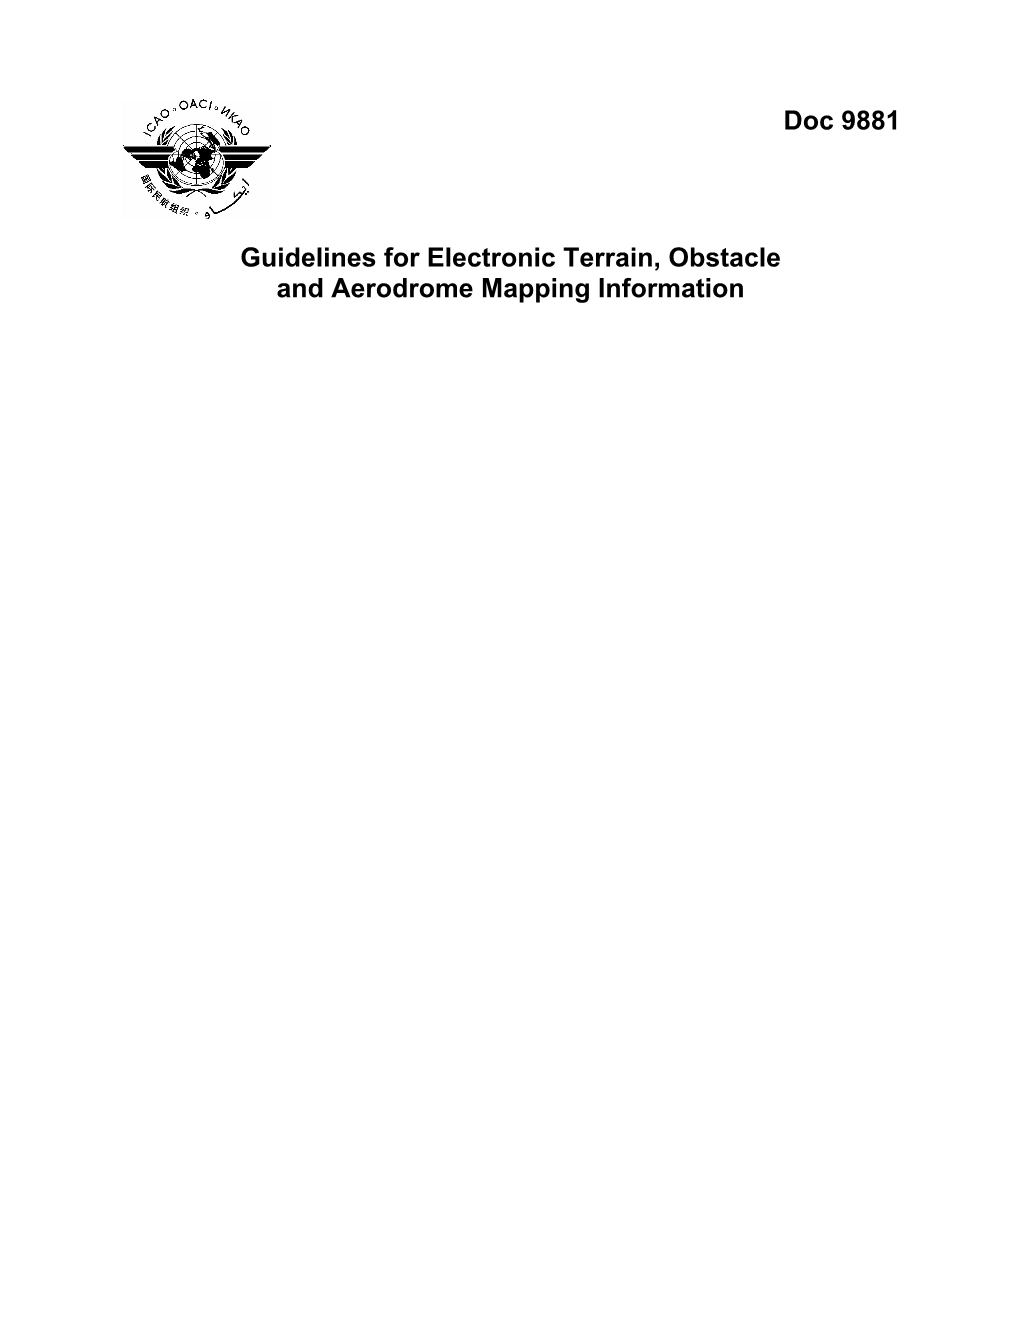 Doc 9881 Guidelines for Electronic Terrain, Obstacle and Aerodrome